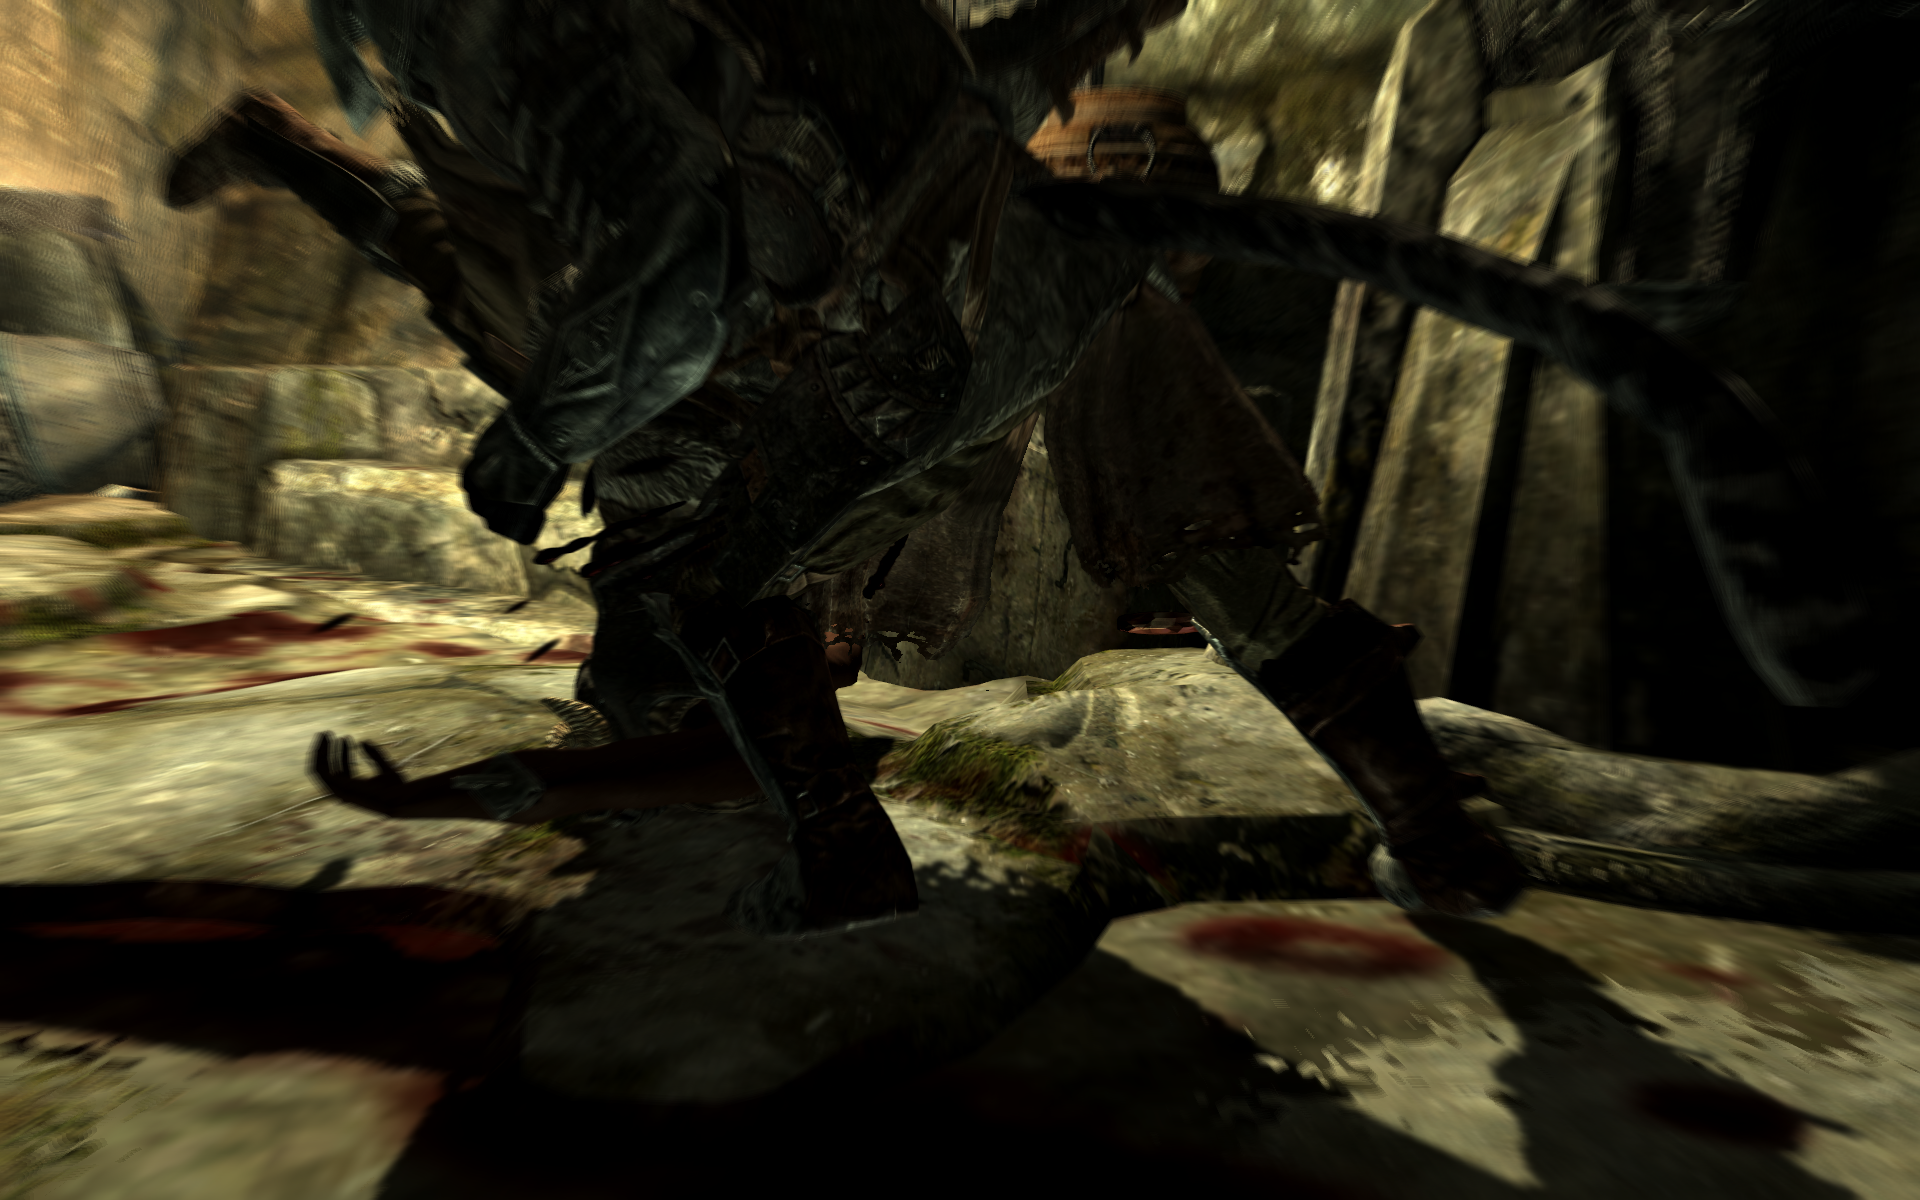 When they added "finishing moves" to more of their fighting options... it was one of the greatest things in Skyrim. If you went fisticuffs you could finish off a bad guy with a choke-slam of gloriousness!